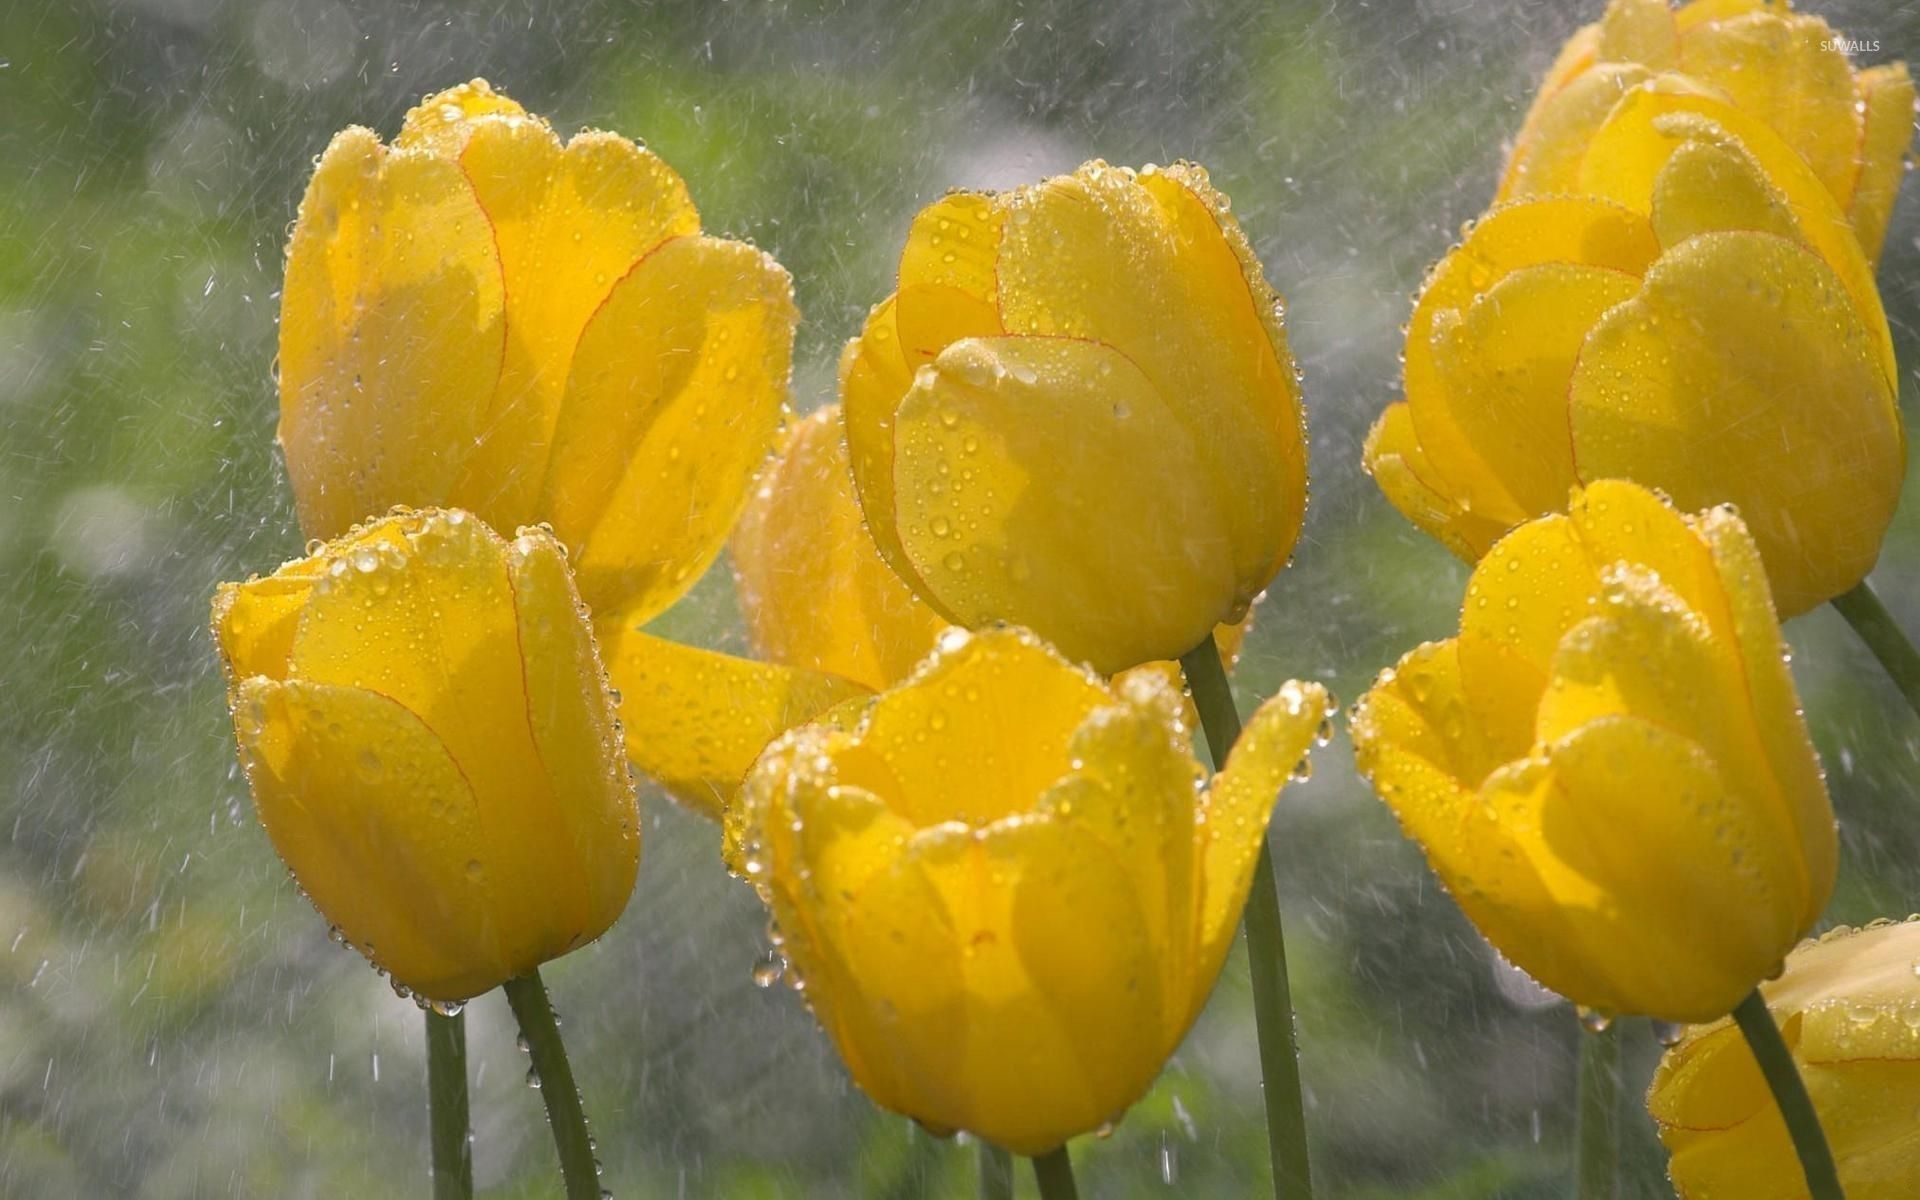 Yellow tulips on a rainy day wallpaper wallpaper